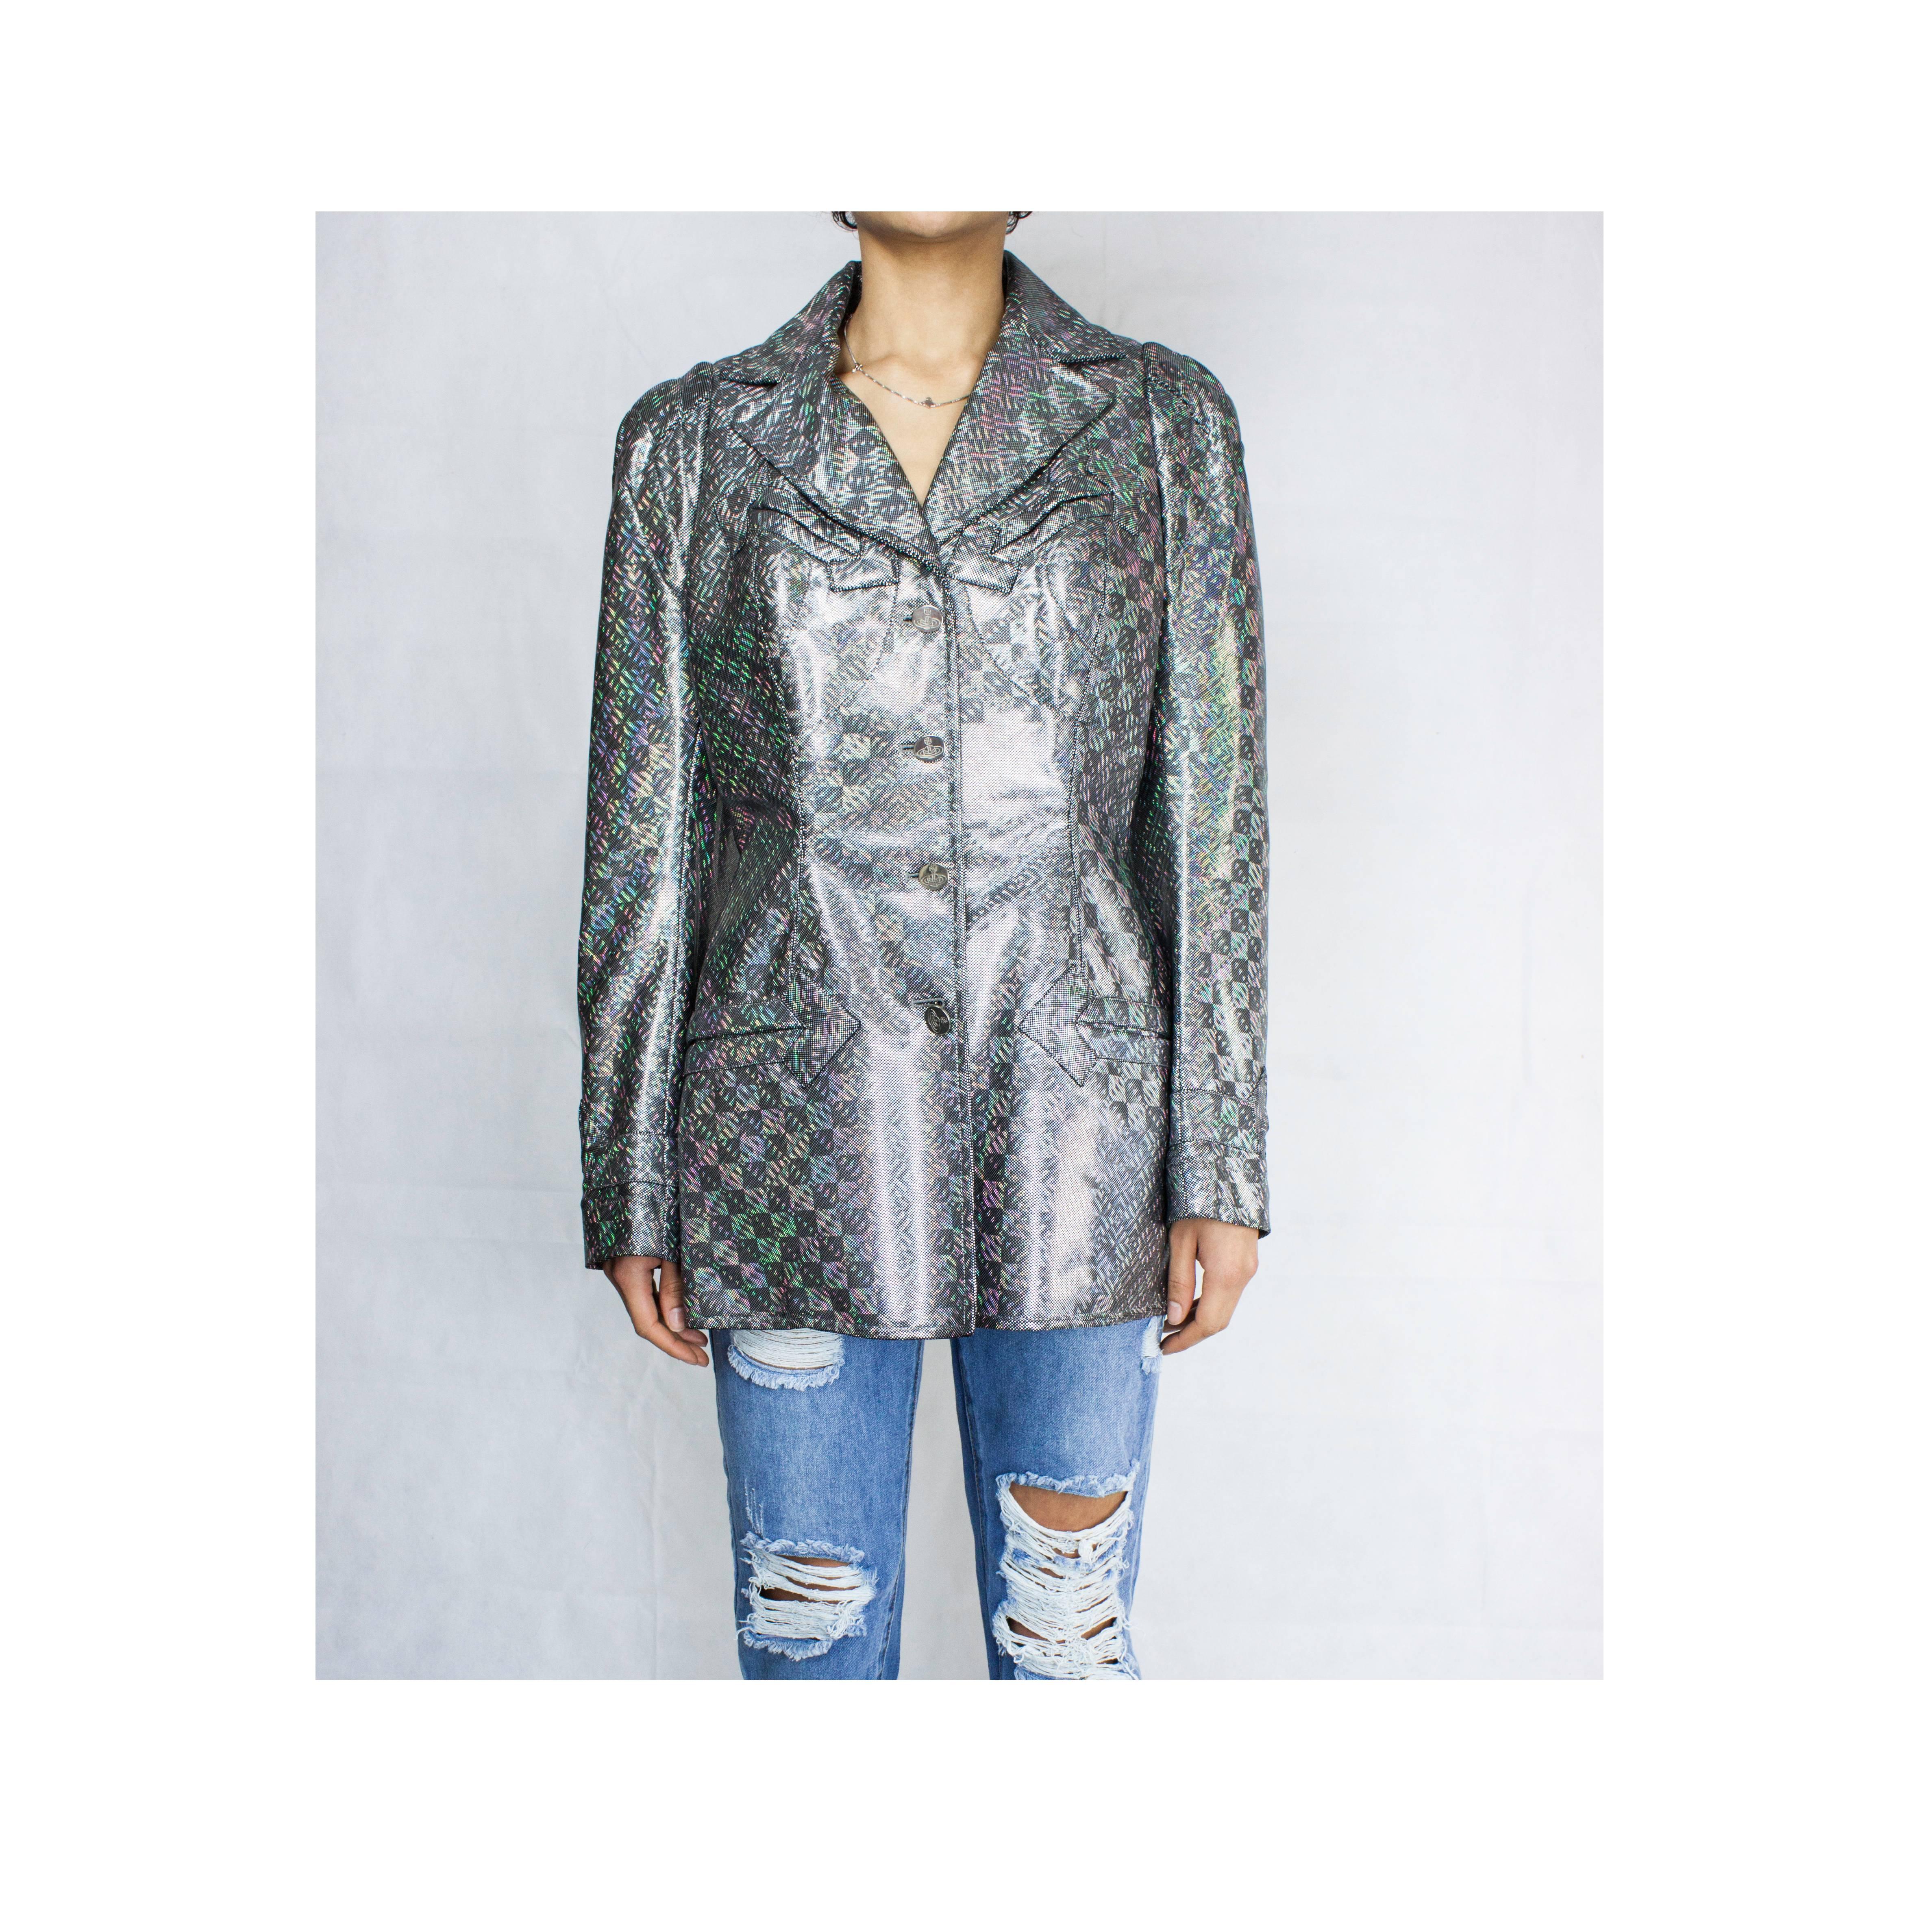 
Vivienne Westwood designed clothes outrageously flamboyant. They are beautiful, and often unconventional. This jacket offers a great opportunity to own a beautiful piece of fashion history from the late designer.

This jacket echoes early twentieth